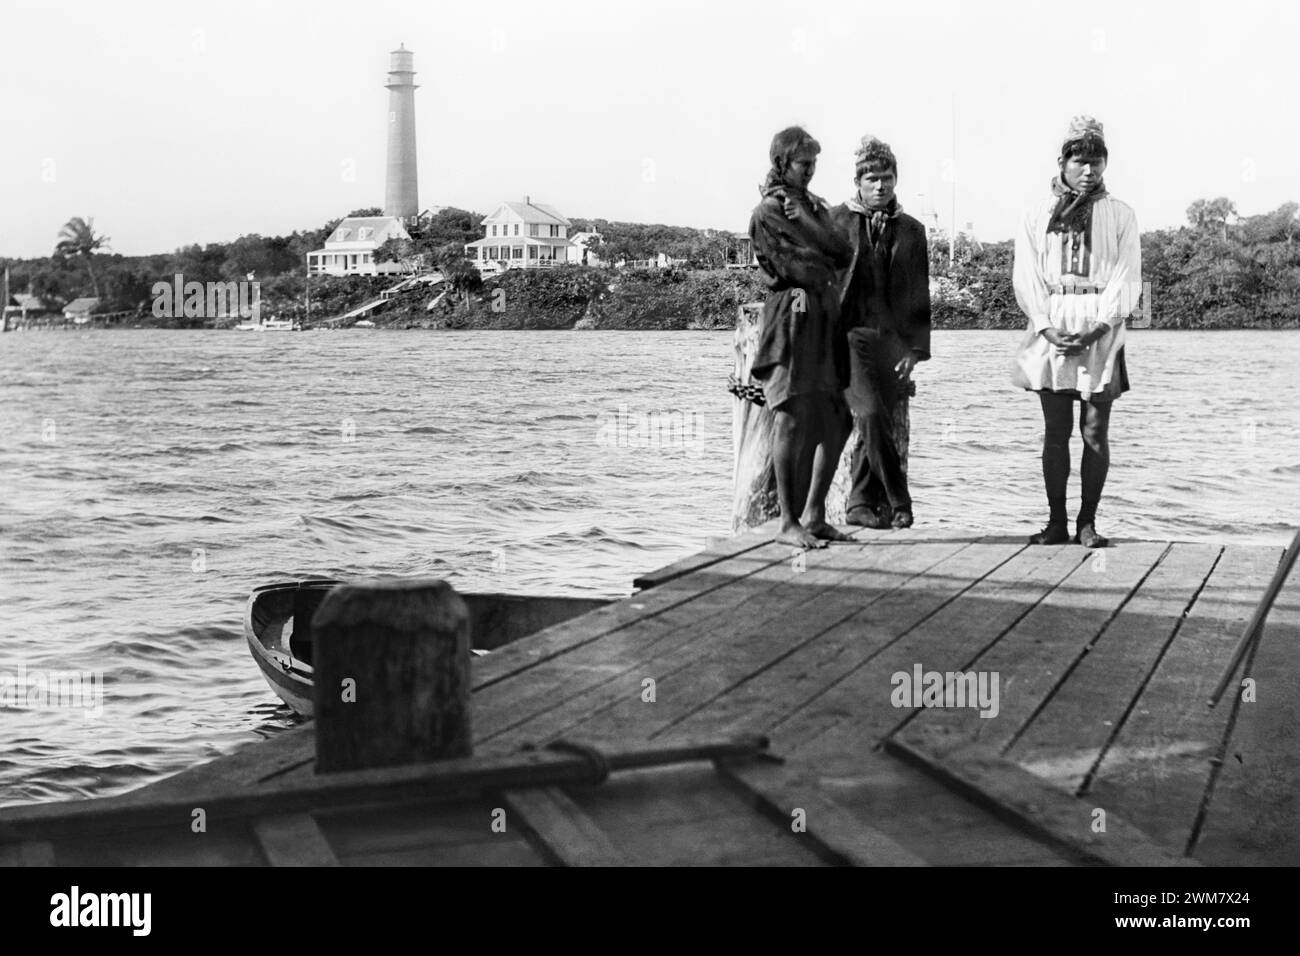 Seminole Indian men standing on a dock across the Jupiter Inlet from the Jupiter Lighthouse in Jupiter, Florida, 1880s. Stock Photo